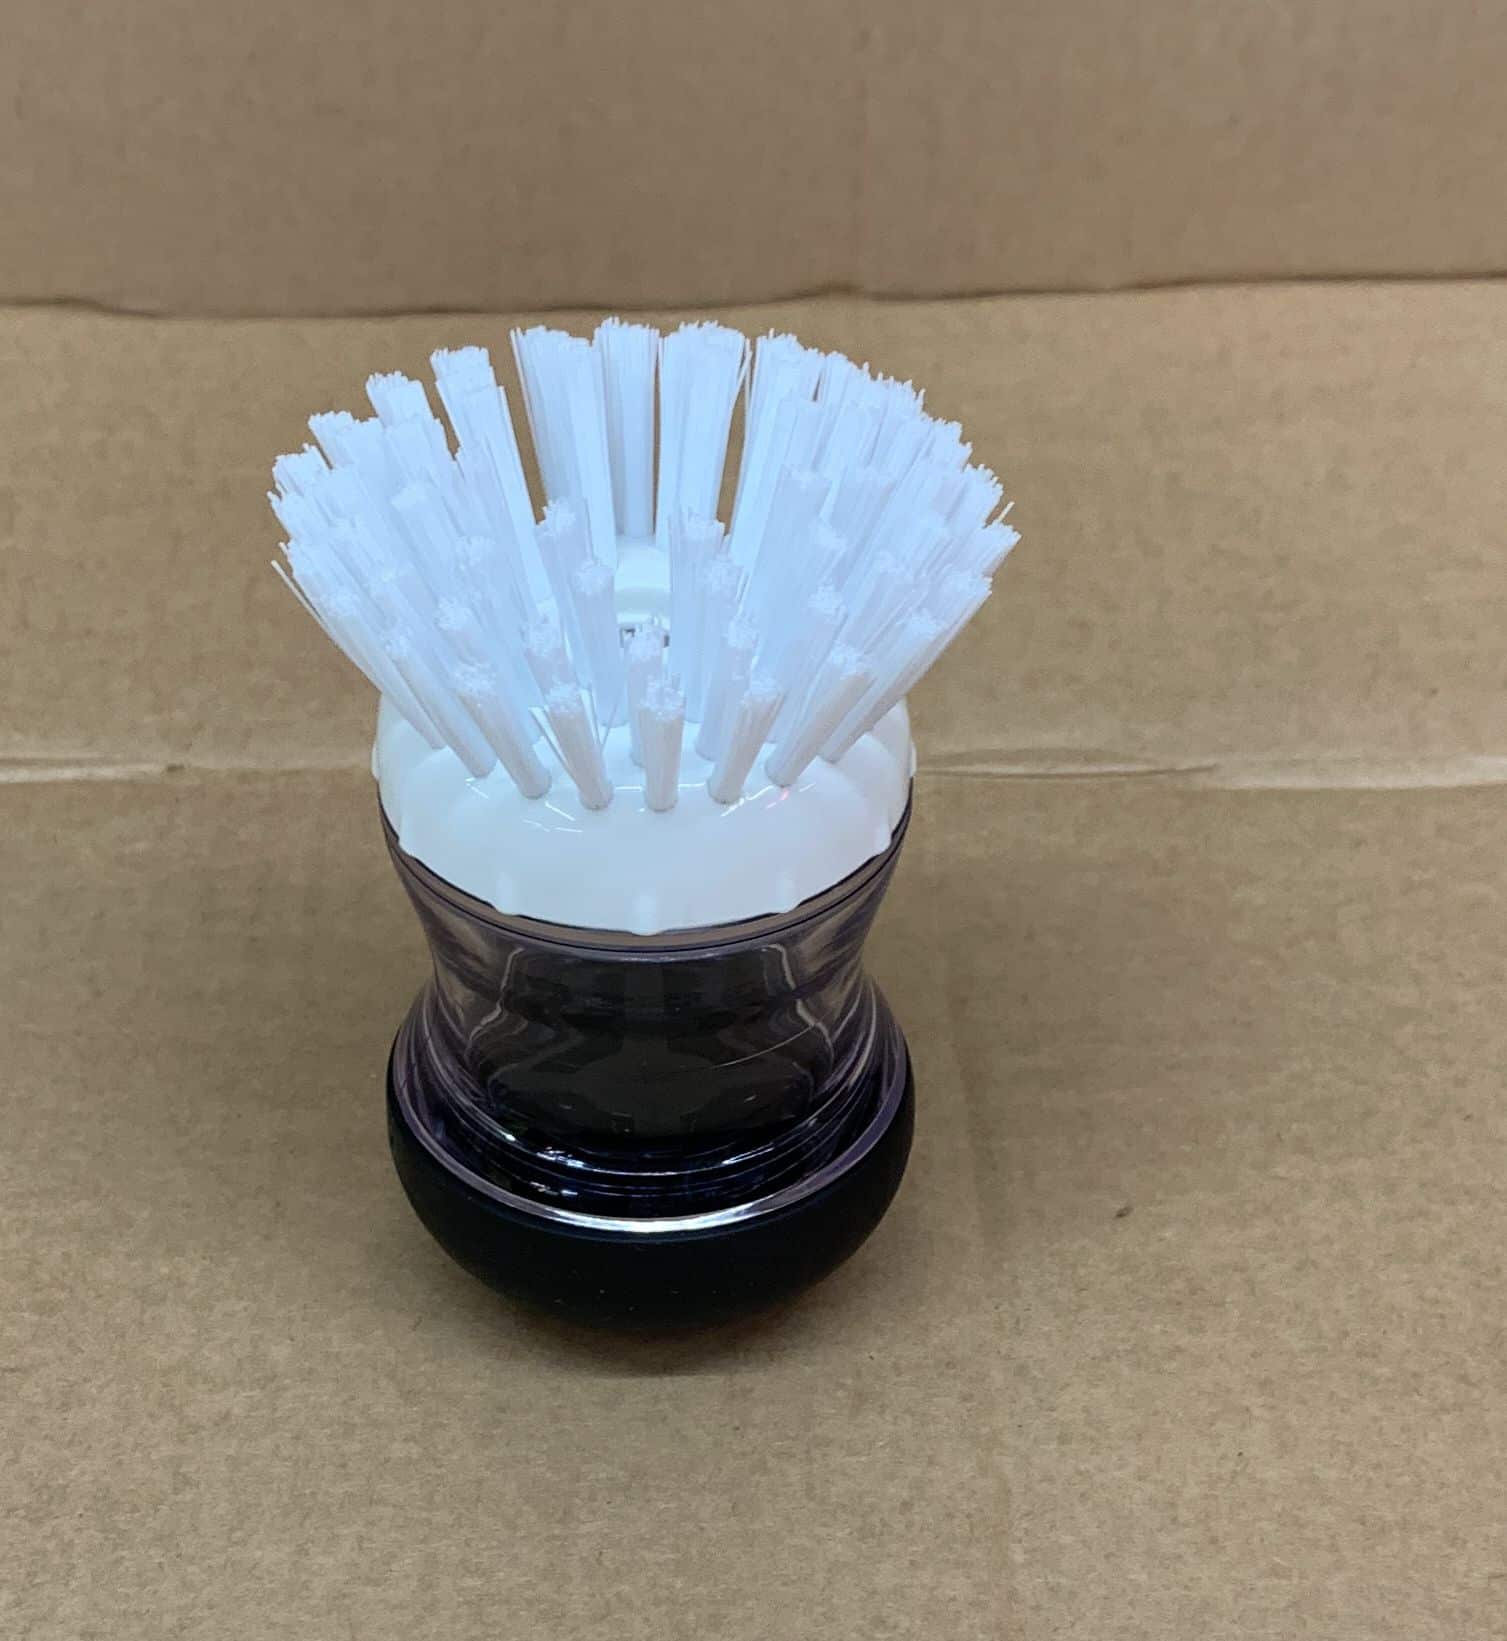 NEW OXO Good Grips Soap Squirting Palm Brush 4810